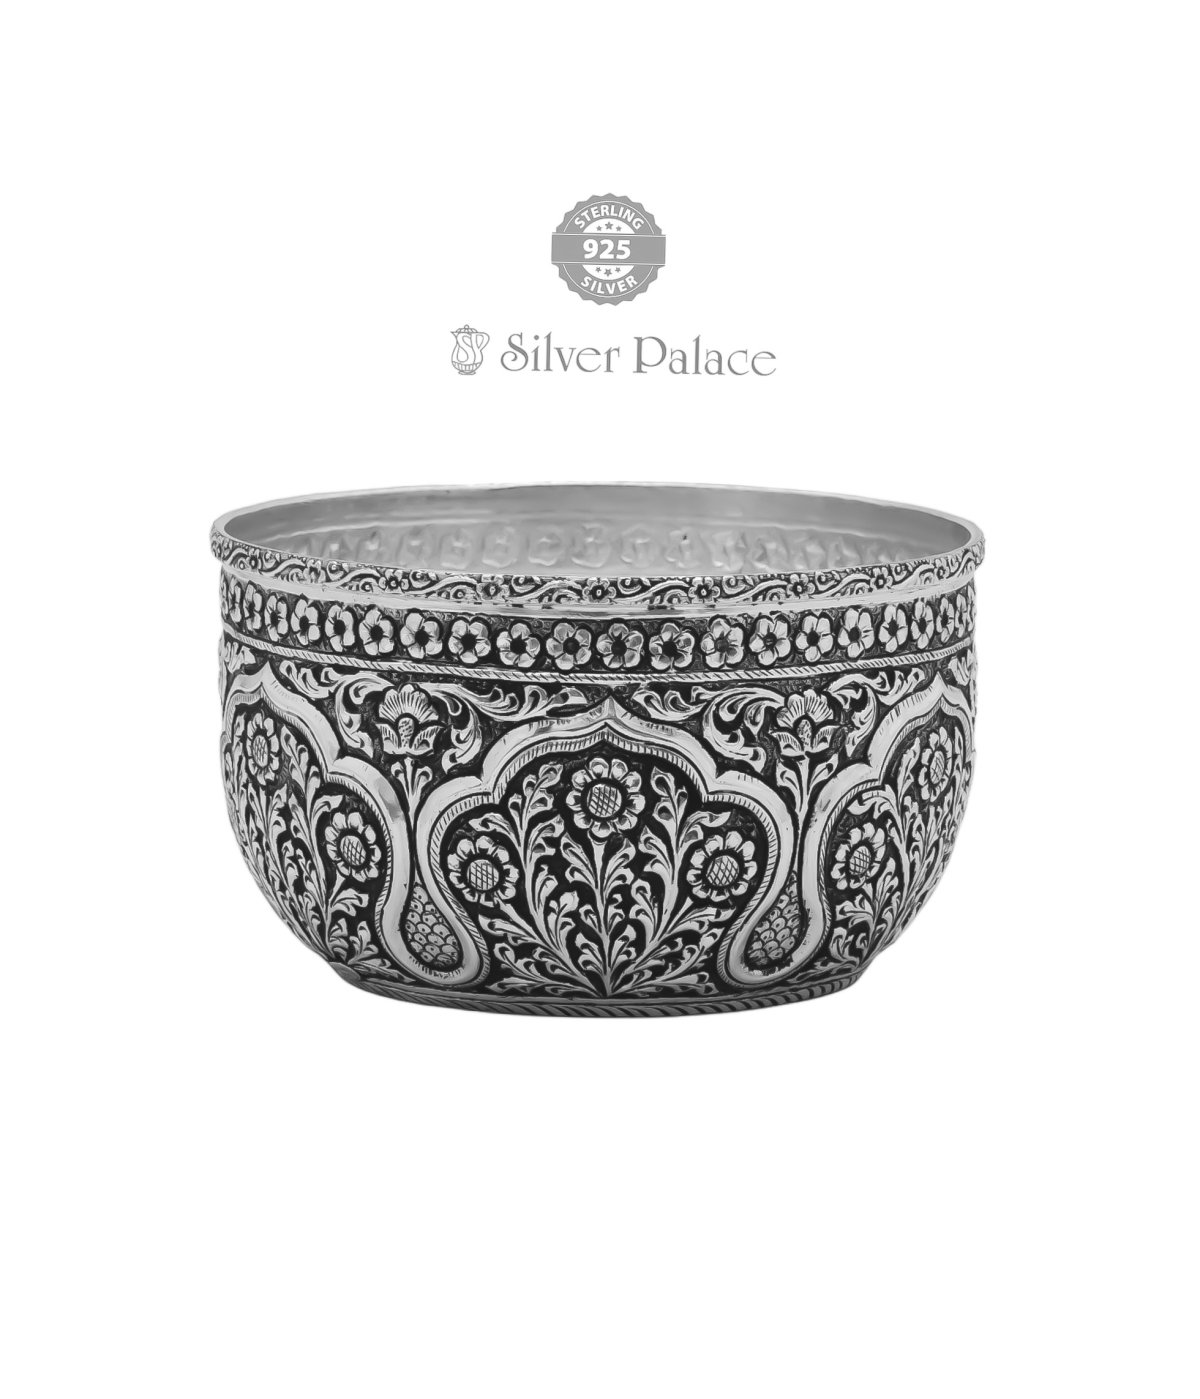 925 PURE SILVER HAND CRAFTED BOWL FOR POOJA USE